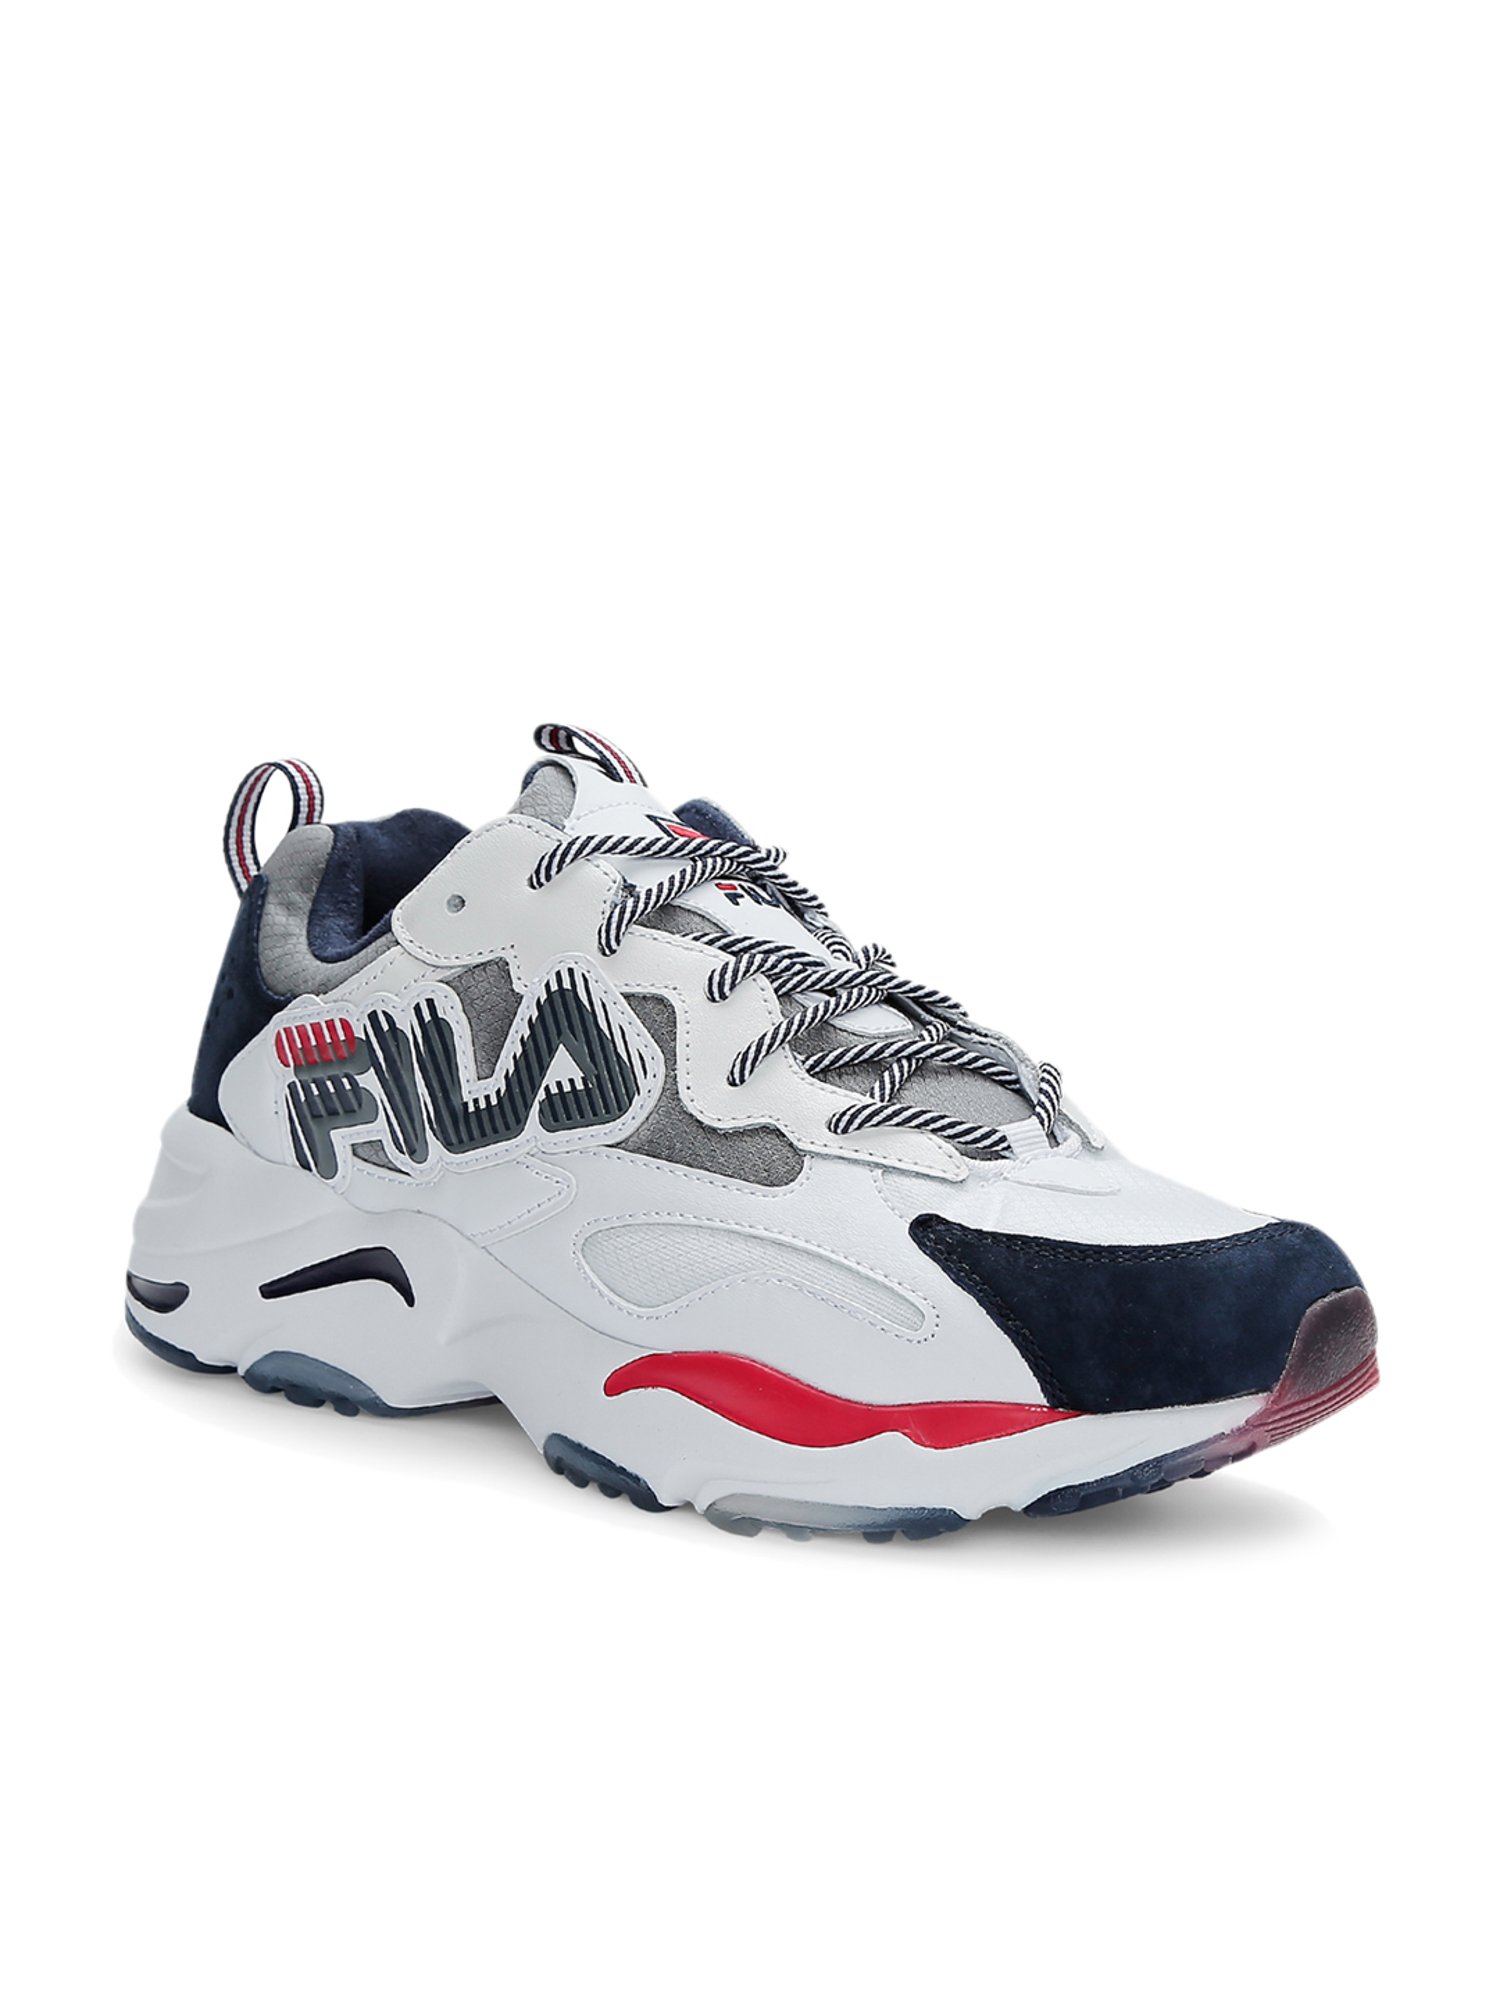 Fila Ray Tracer White Sneakers from 